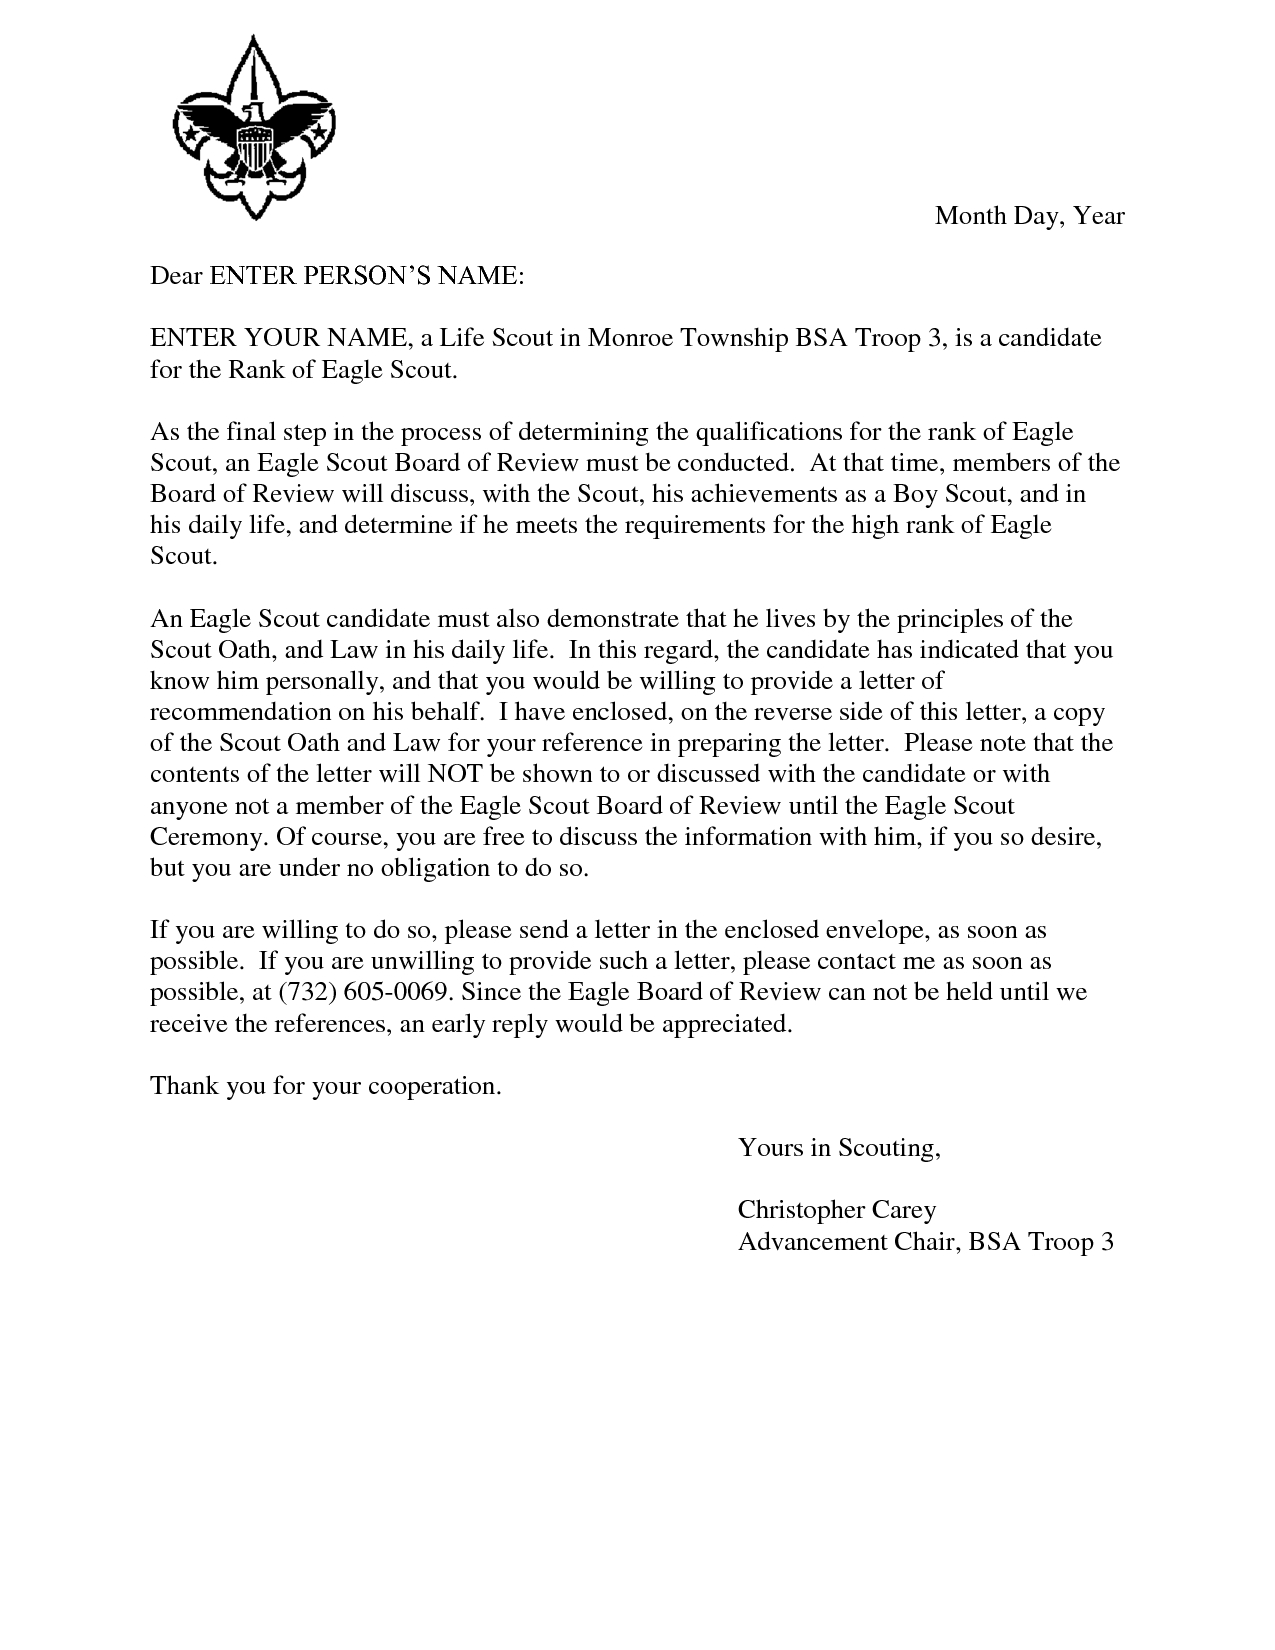 Eagle Scout Reference Request Sample Letter Doc 7 Hfr990q in sizing 1275 X 1650